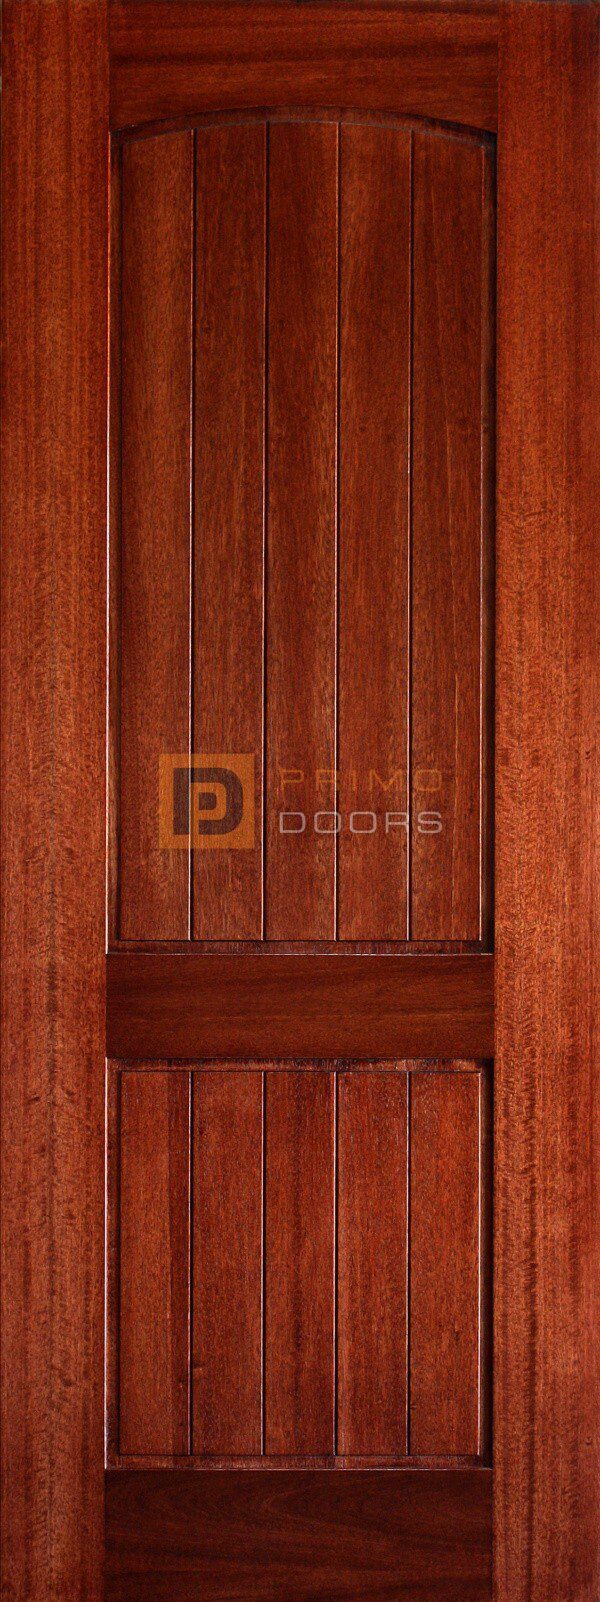 6′ 8″ Mahogany 2 Panel Arched V-Groove Solid Wood Barn Door – 3-0x8-0_Mahogany_2_Panel_Arch_V-Groove